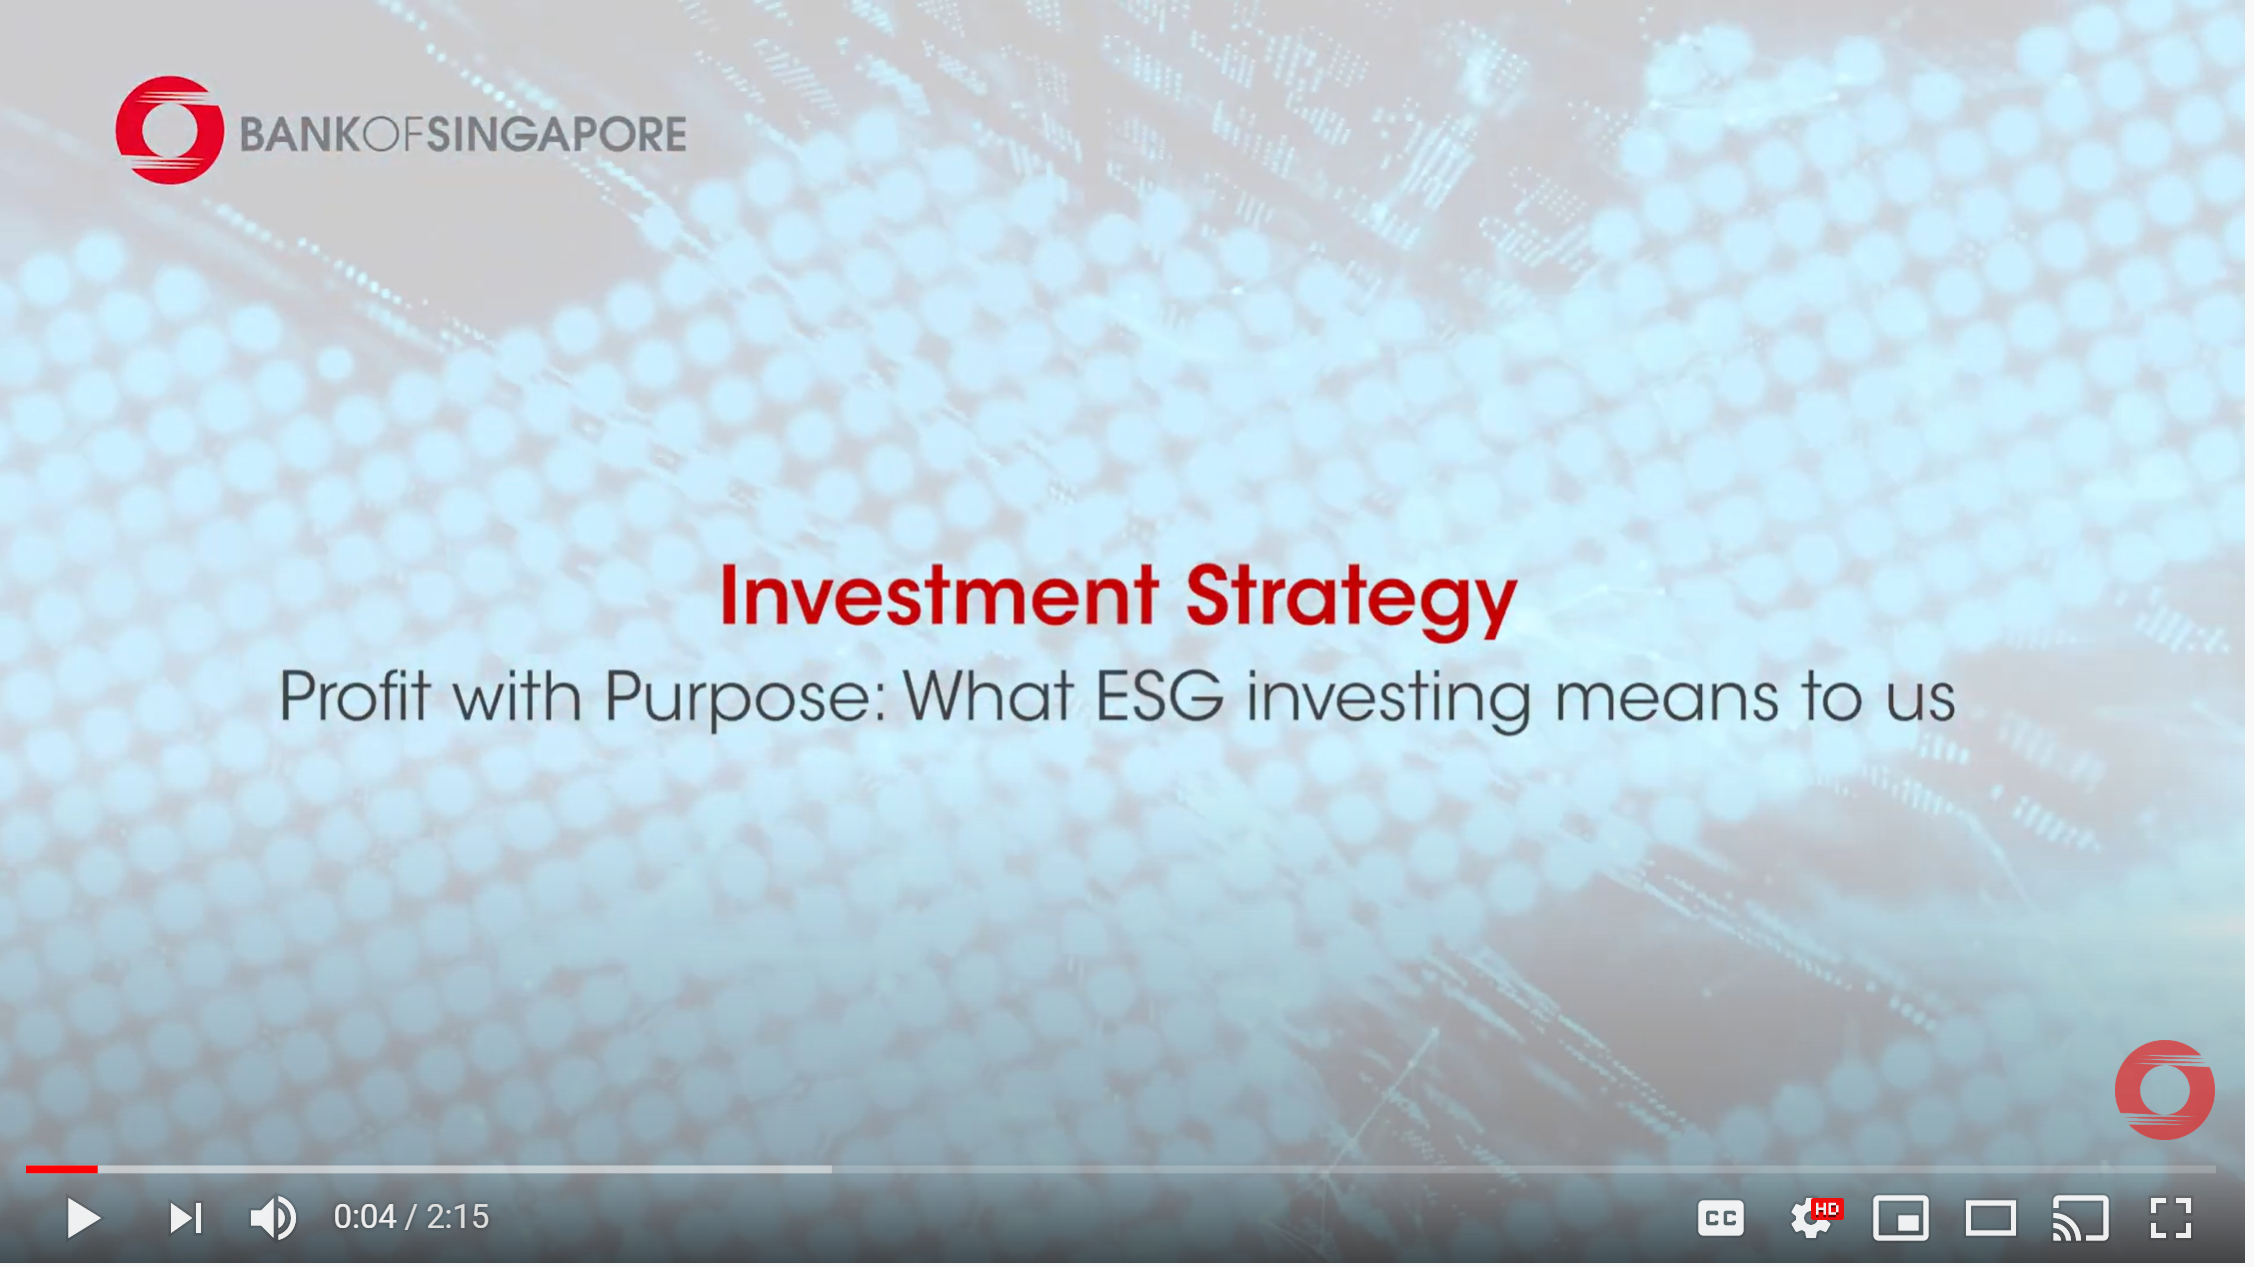 Investment Strategy: Profit with Purpose